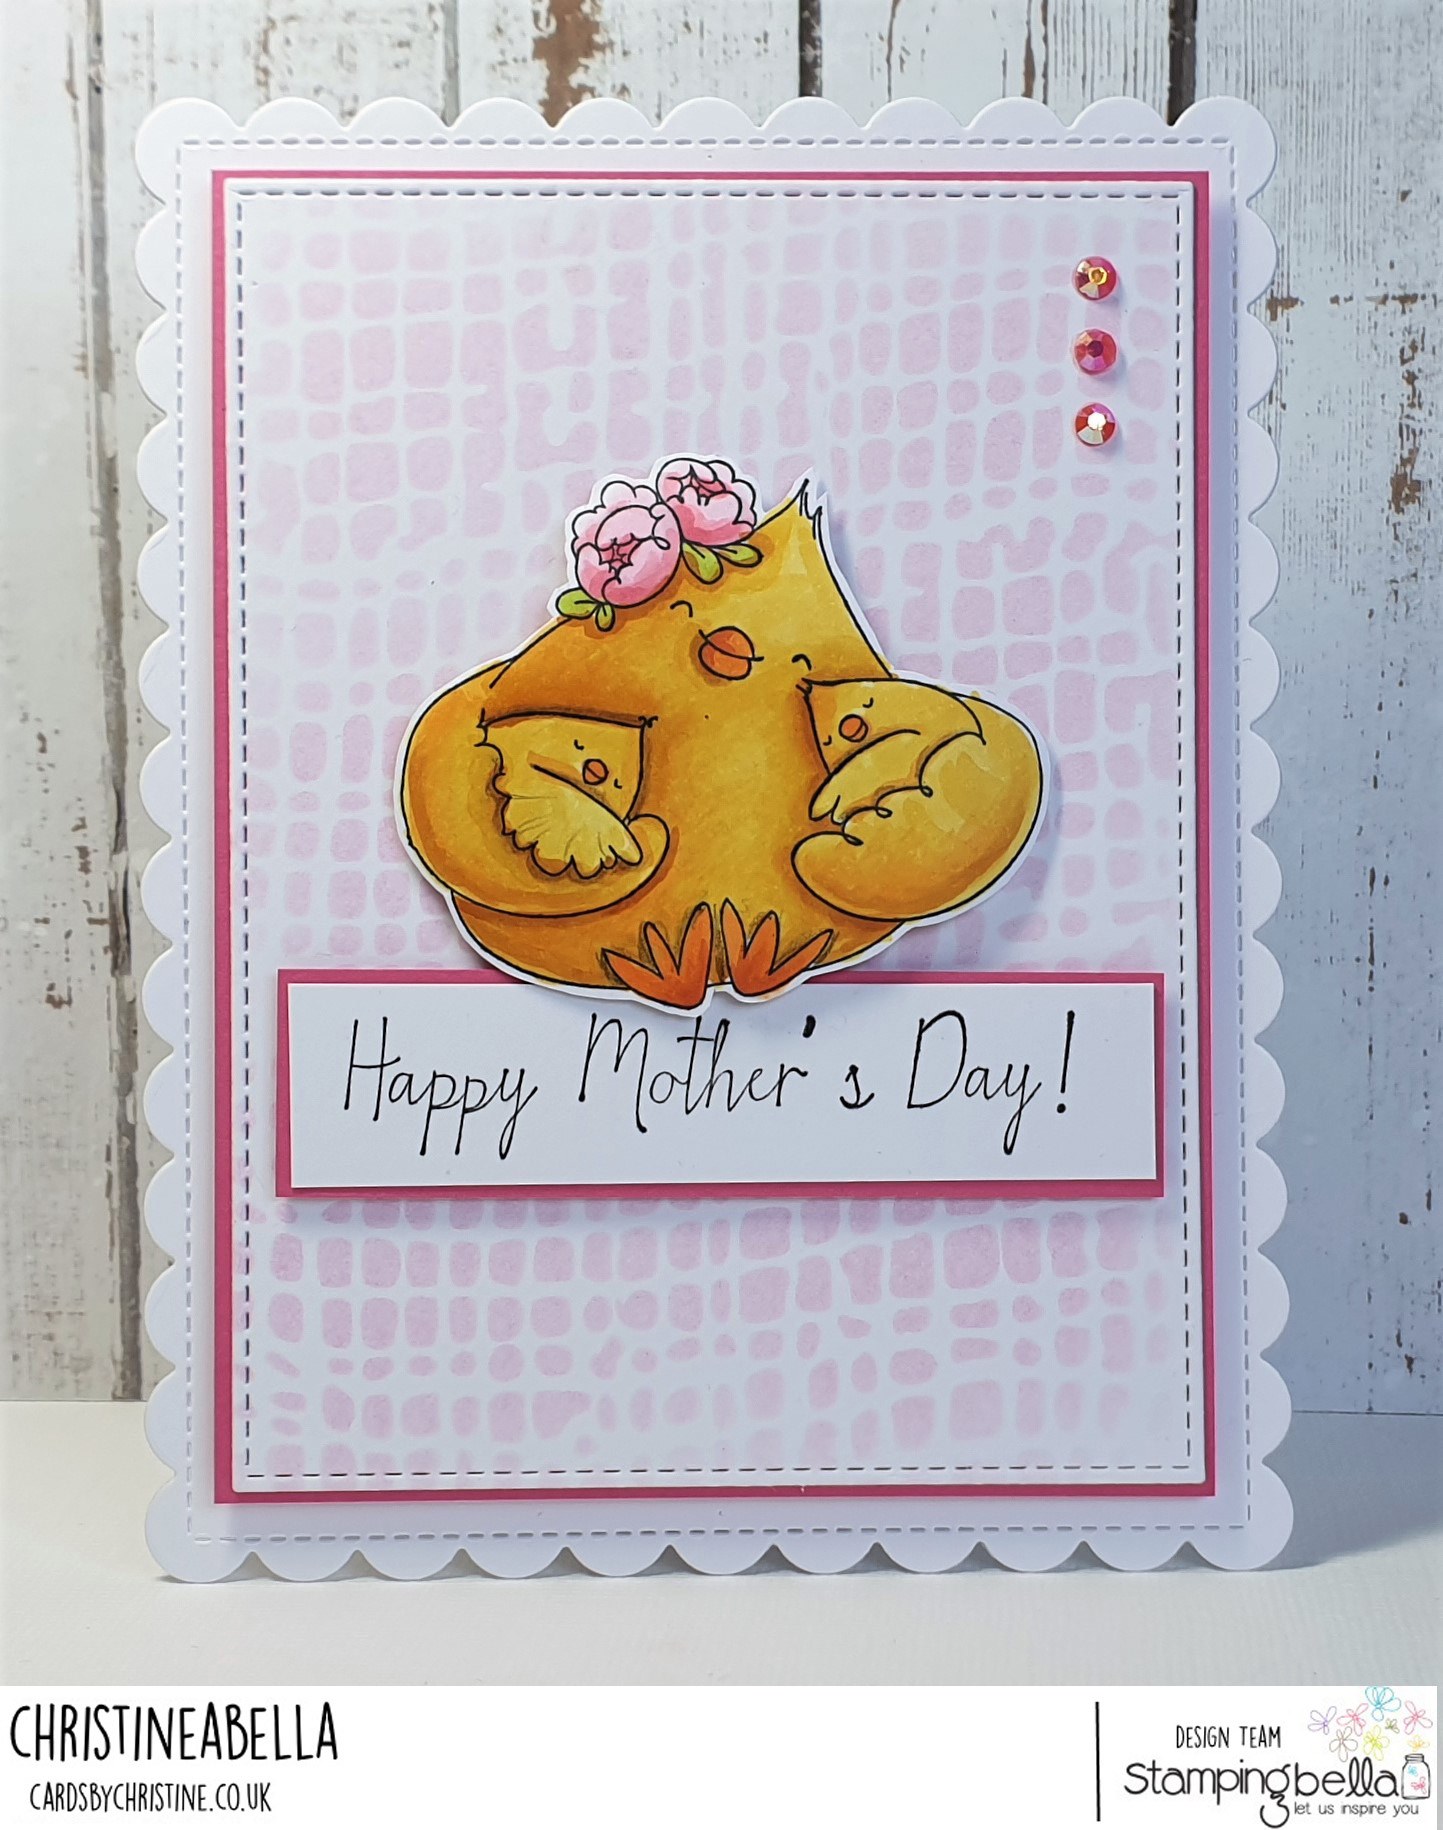 www.stampingbella.com: rubber stamp used : Mothers day CHICK . card by Christine Levison